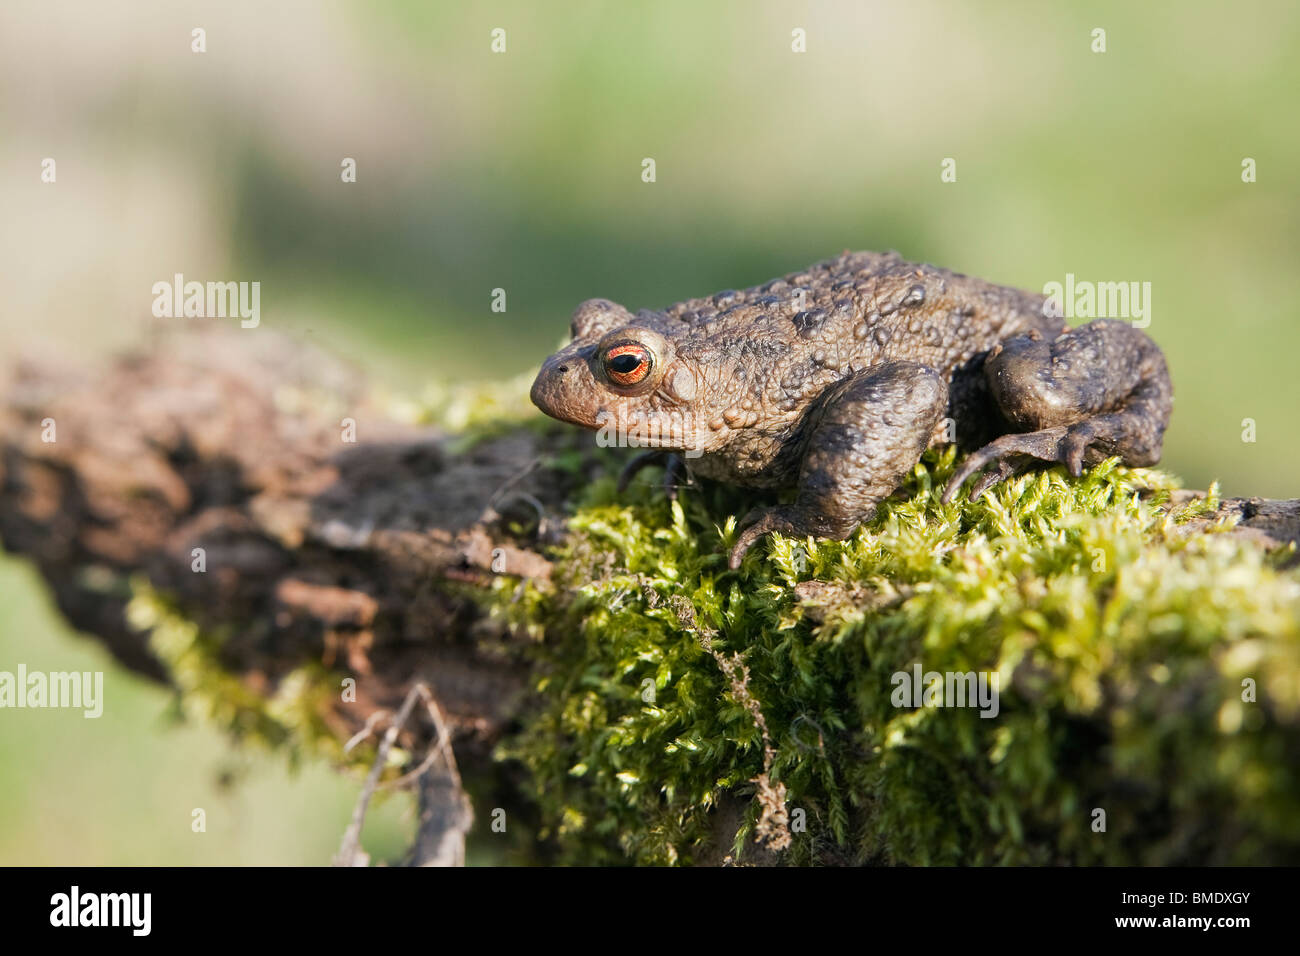 A common toad (bufo bufo) sitting on a mossy branch in the English countryside Stock Photo